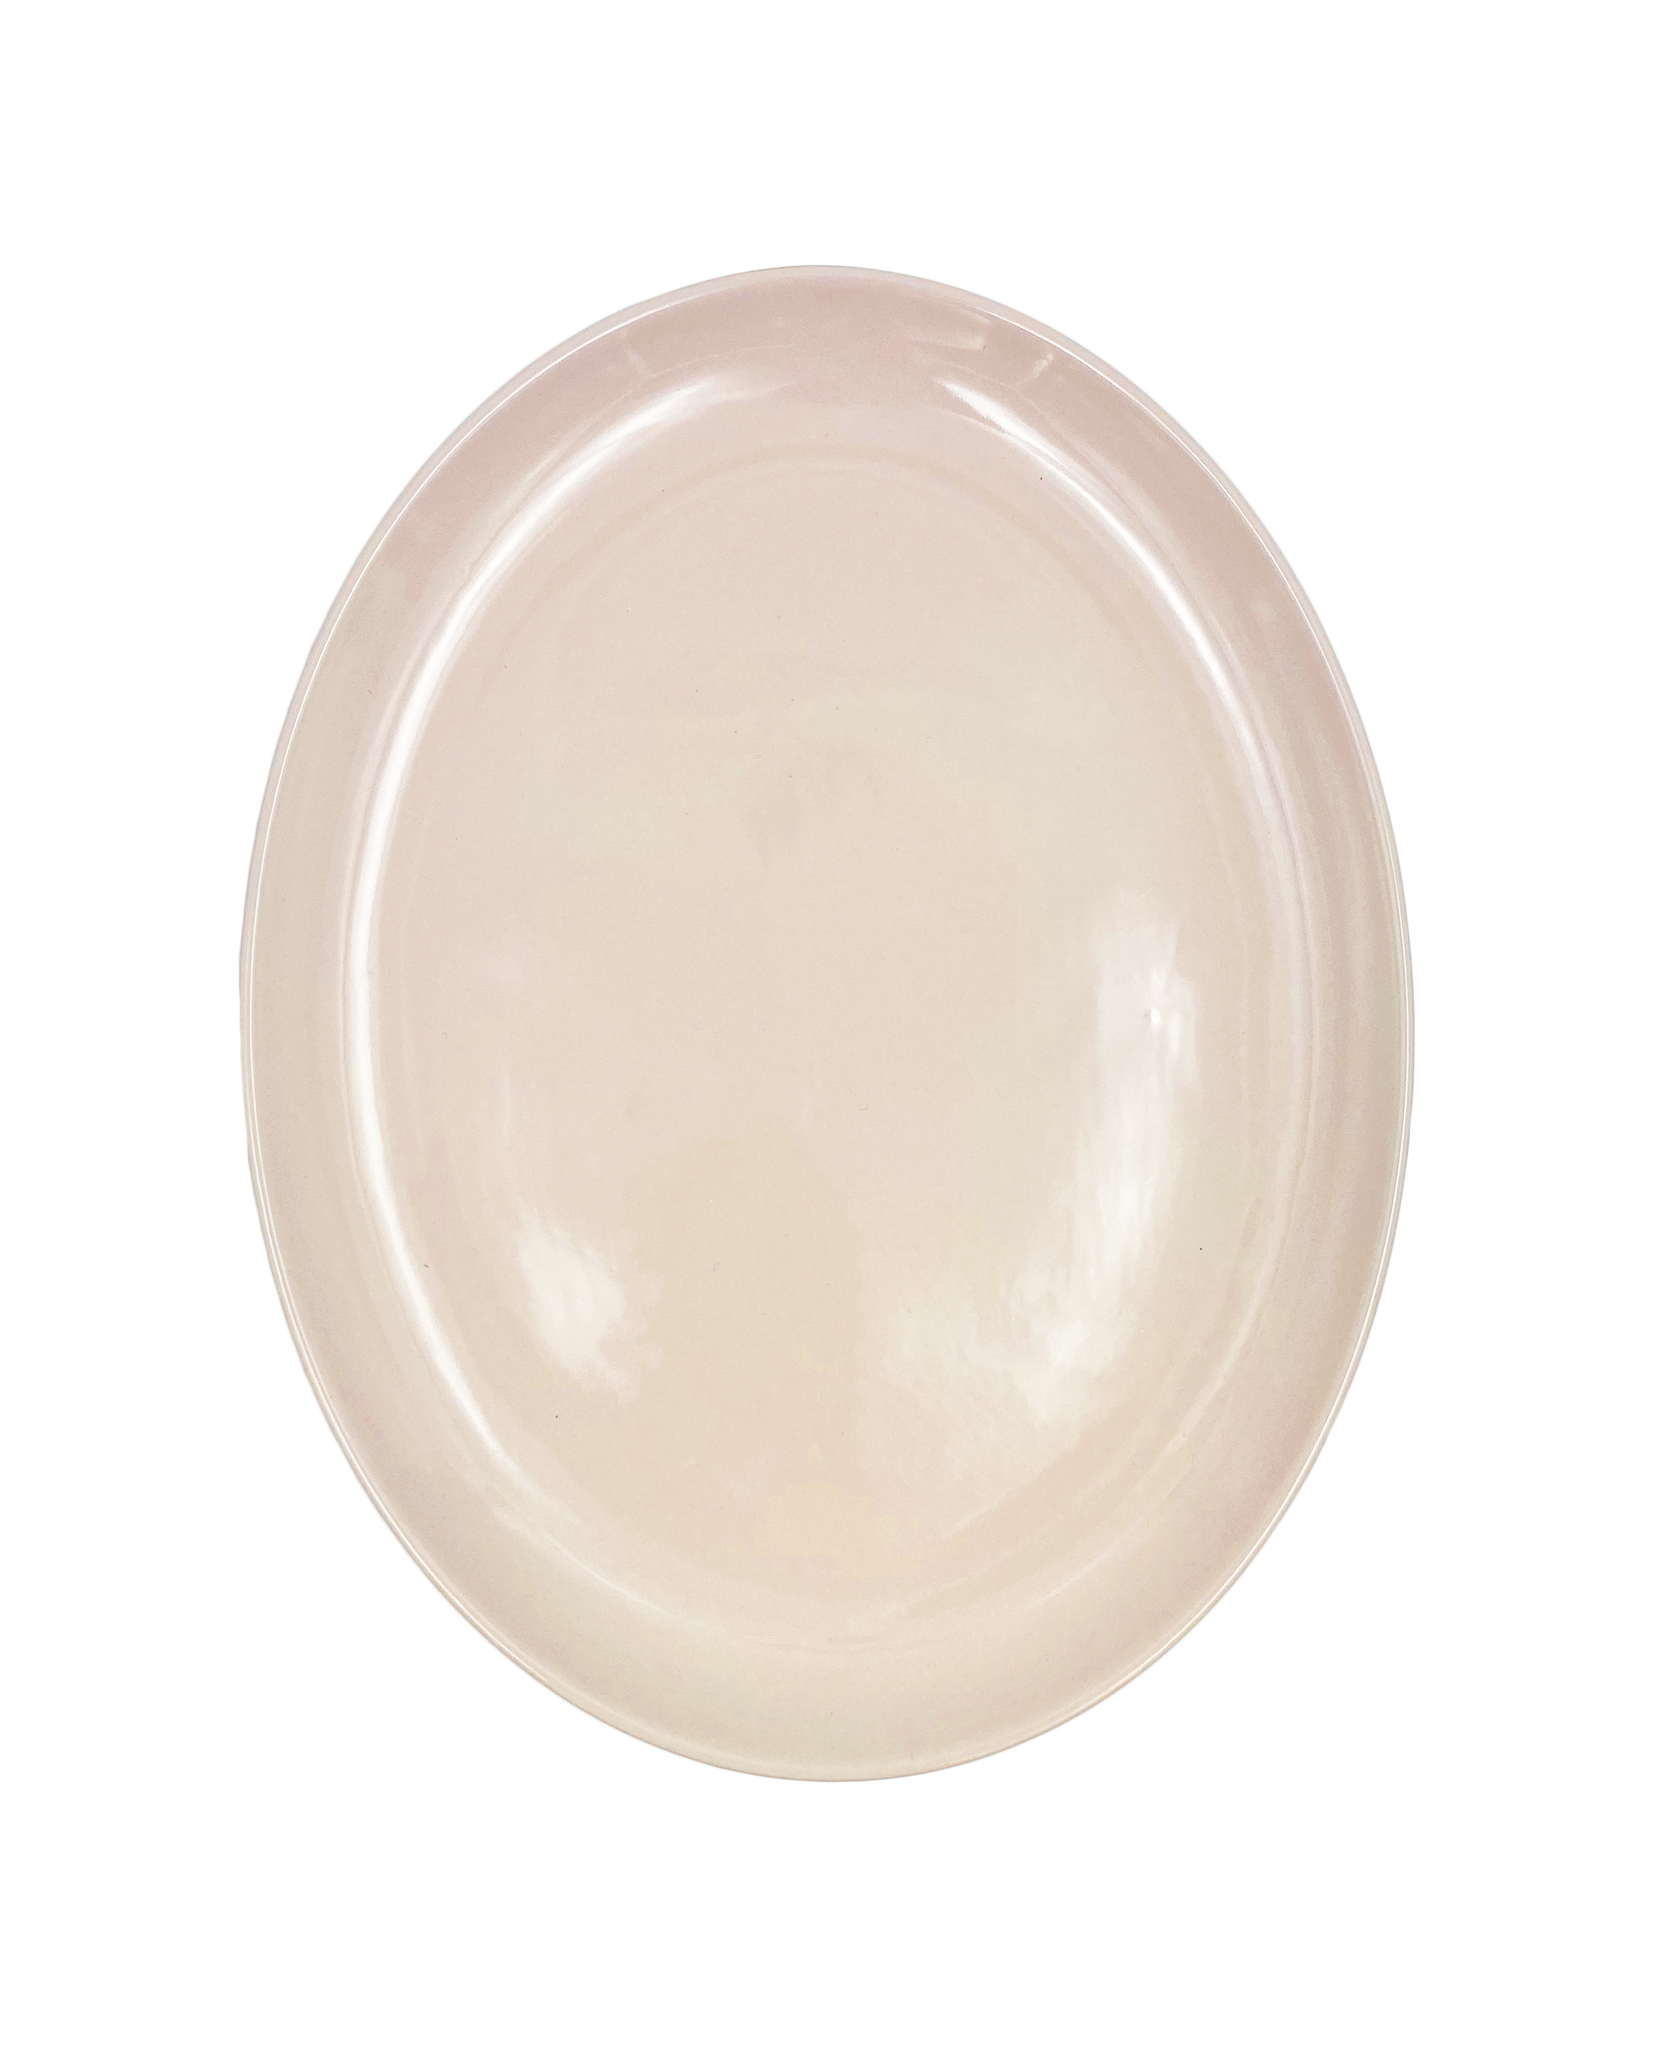 Shell Bisque Large Oval Plate- Soft Pink- Set of 4